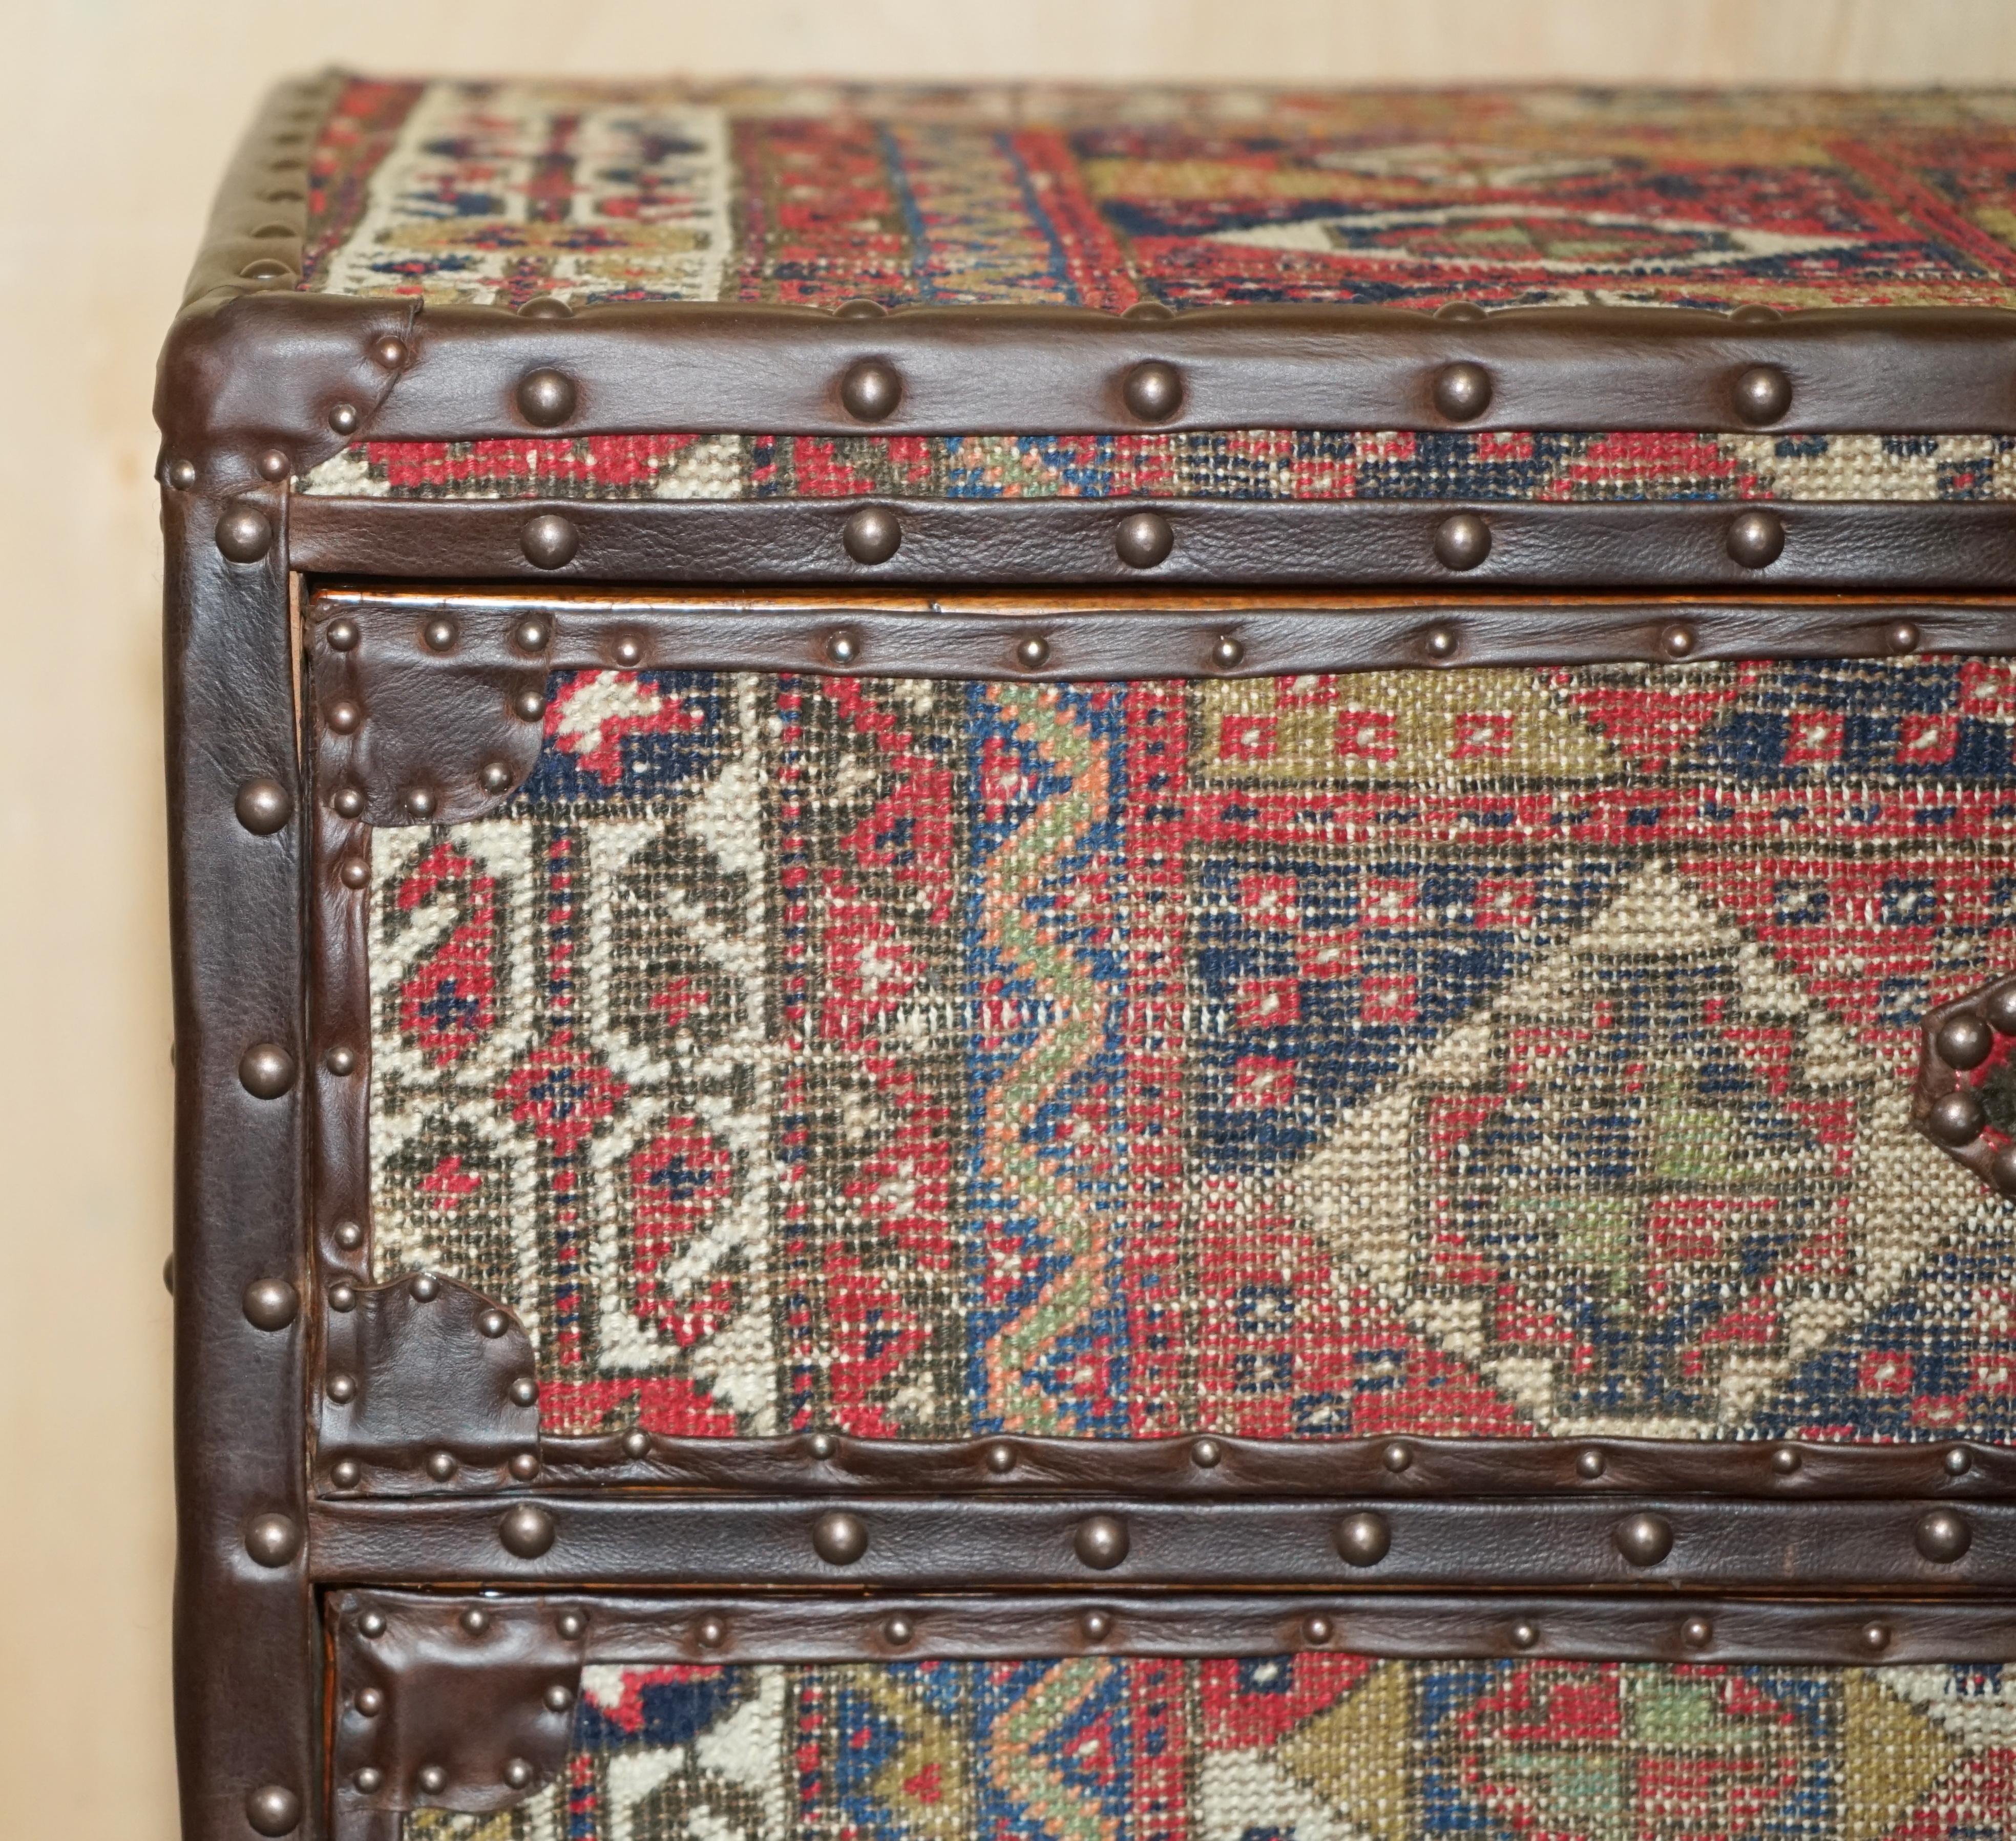 ViNTAGE KILIM & BROWN LEATHER CHEST OF DRAWERS FINISHED WITH ANTIQUE PIN NAILs (Handgefertigt) im Angebot